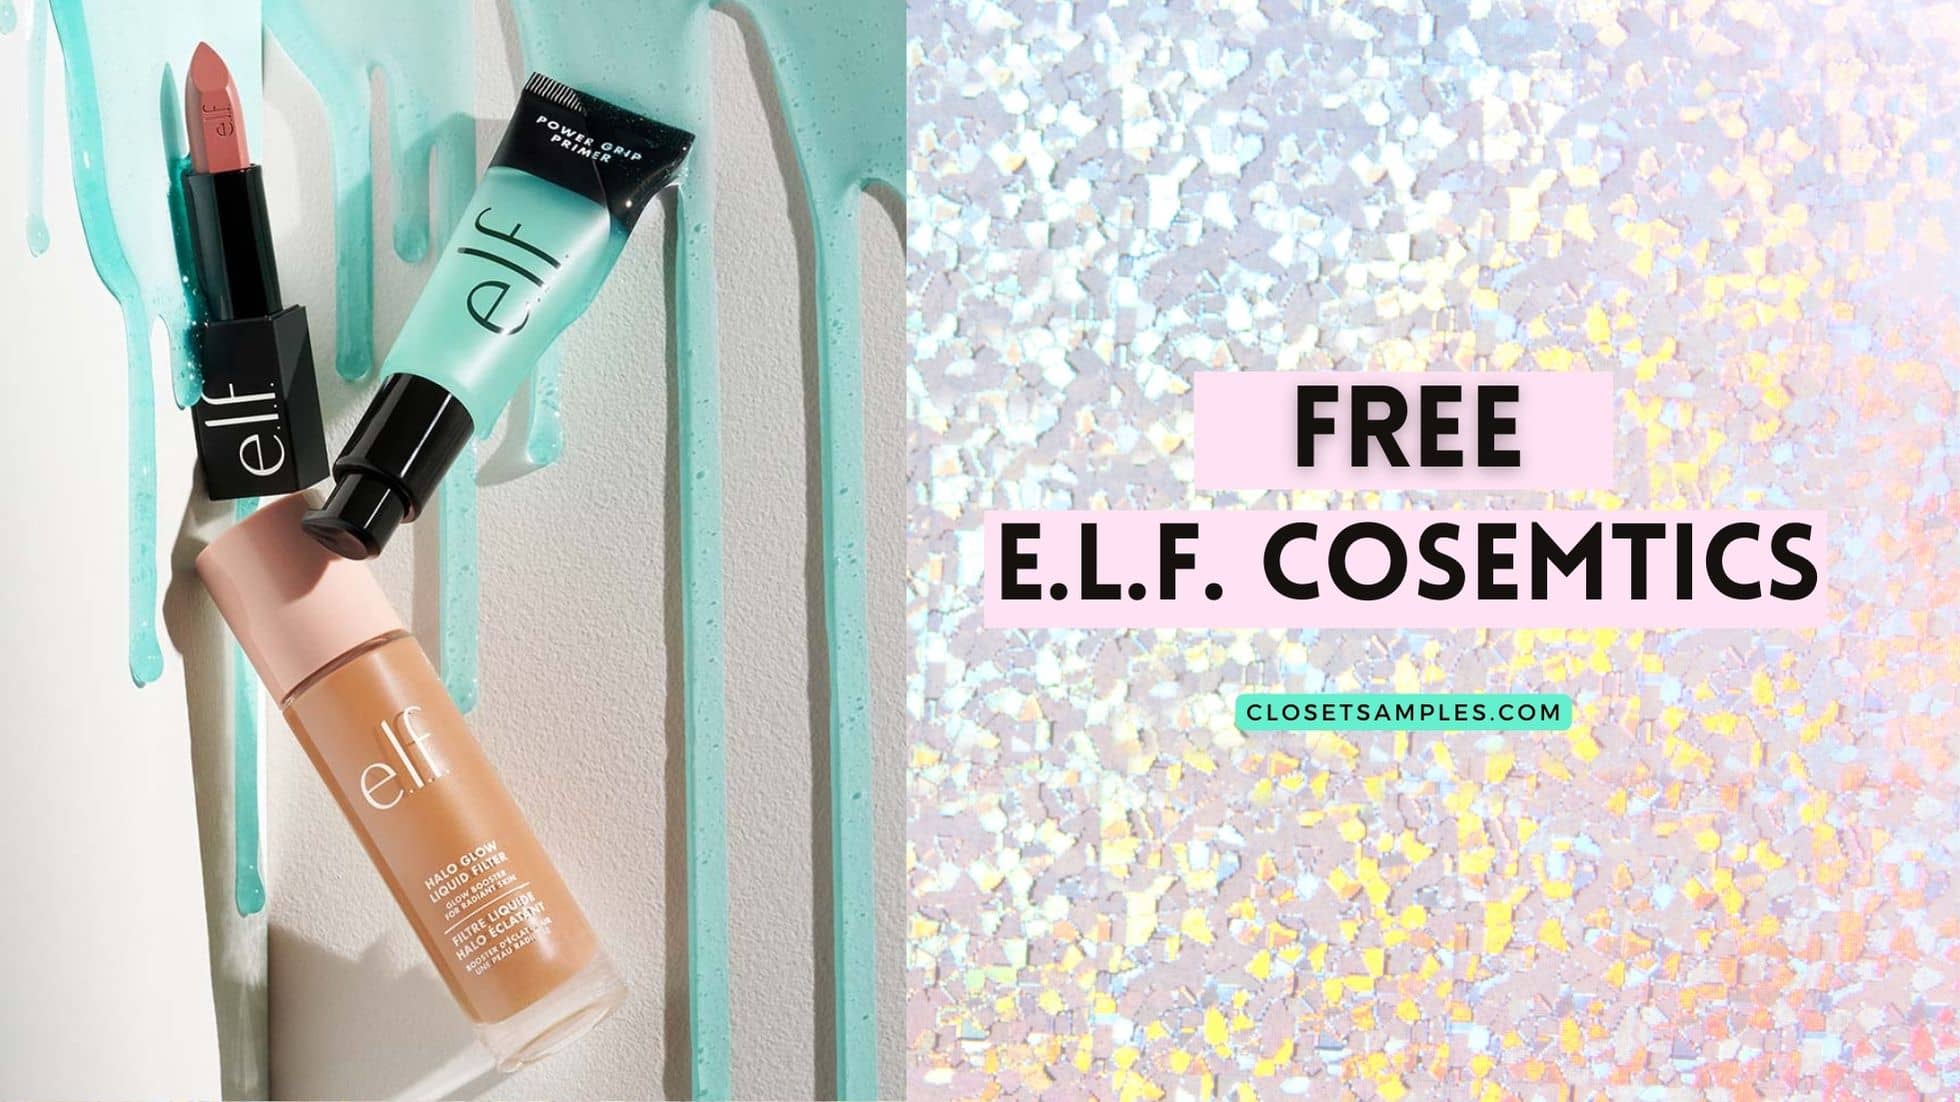 How to Get FREE E.l.f. Cosmeti...